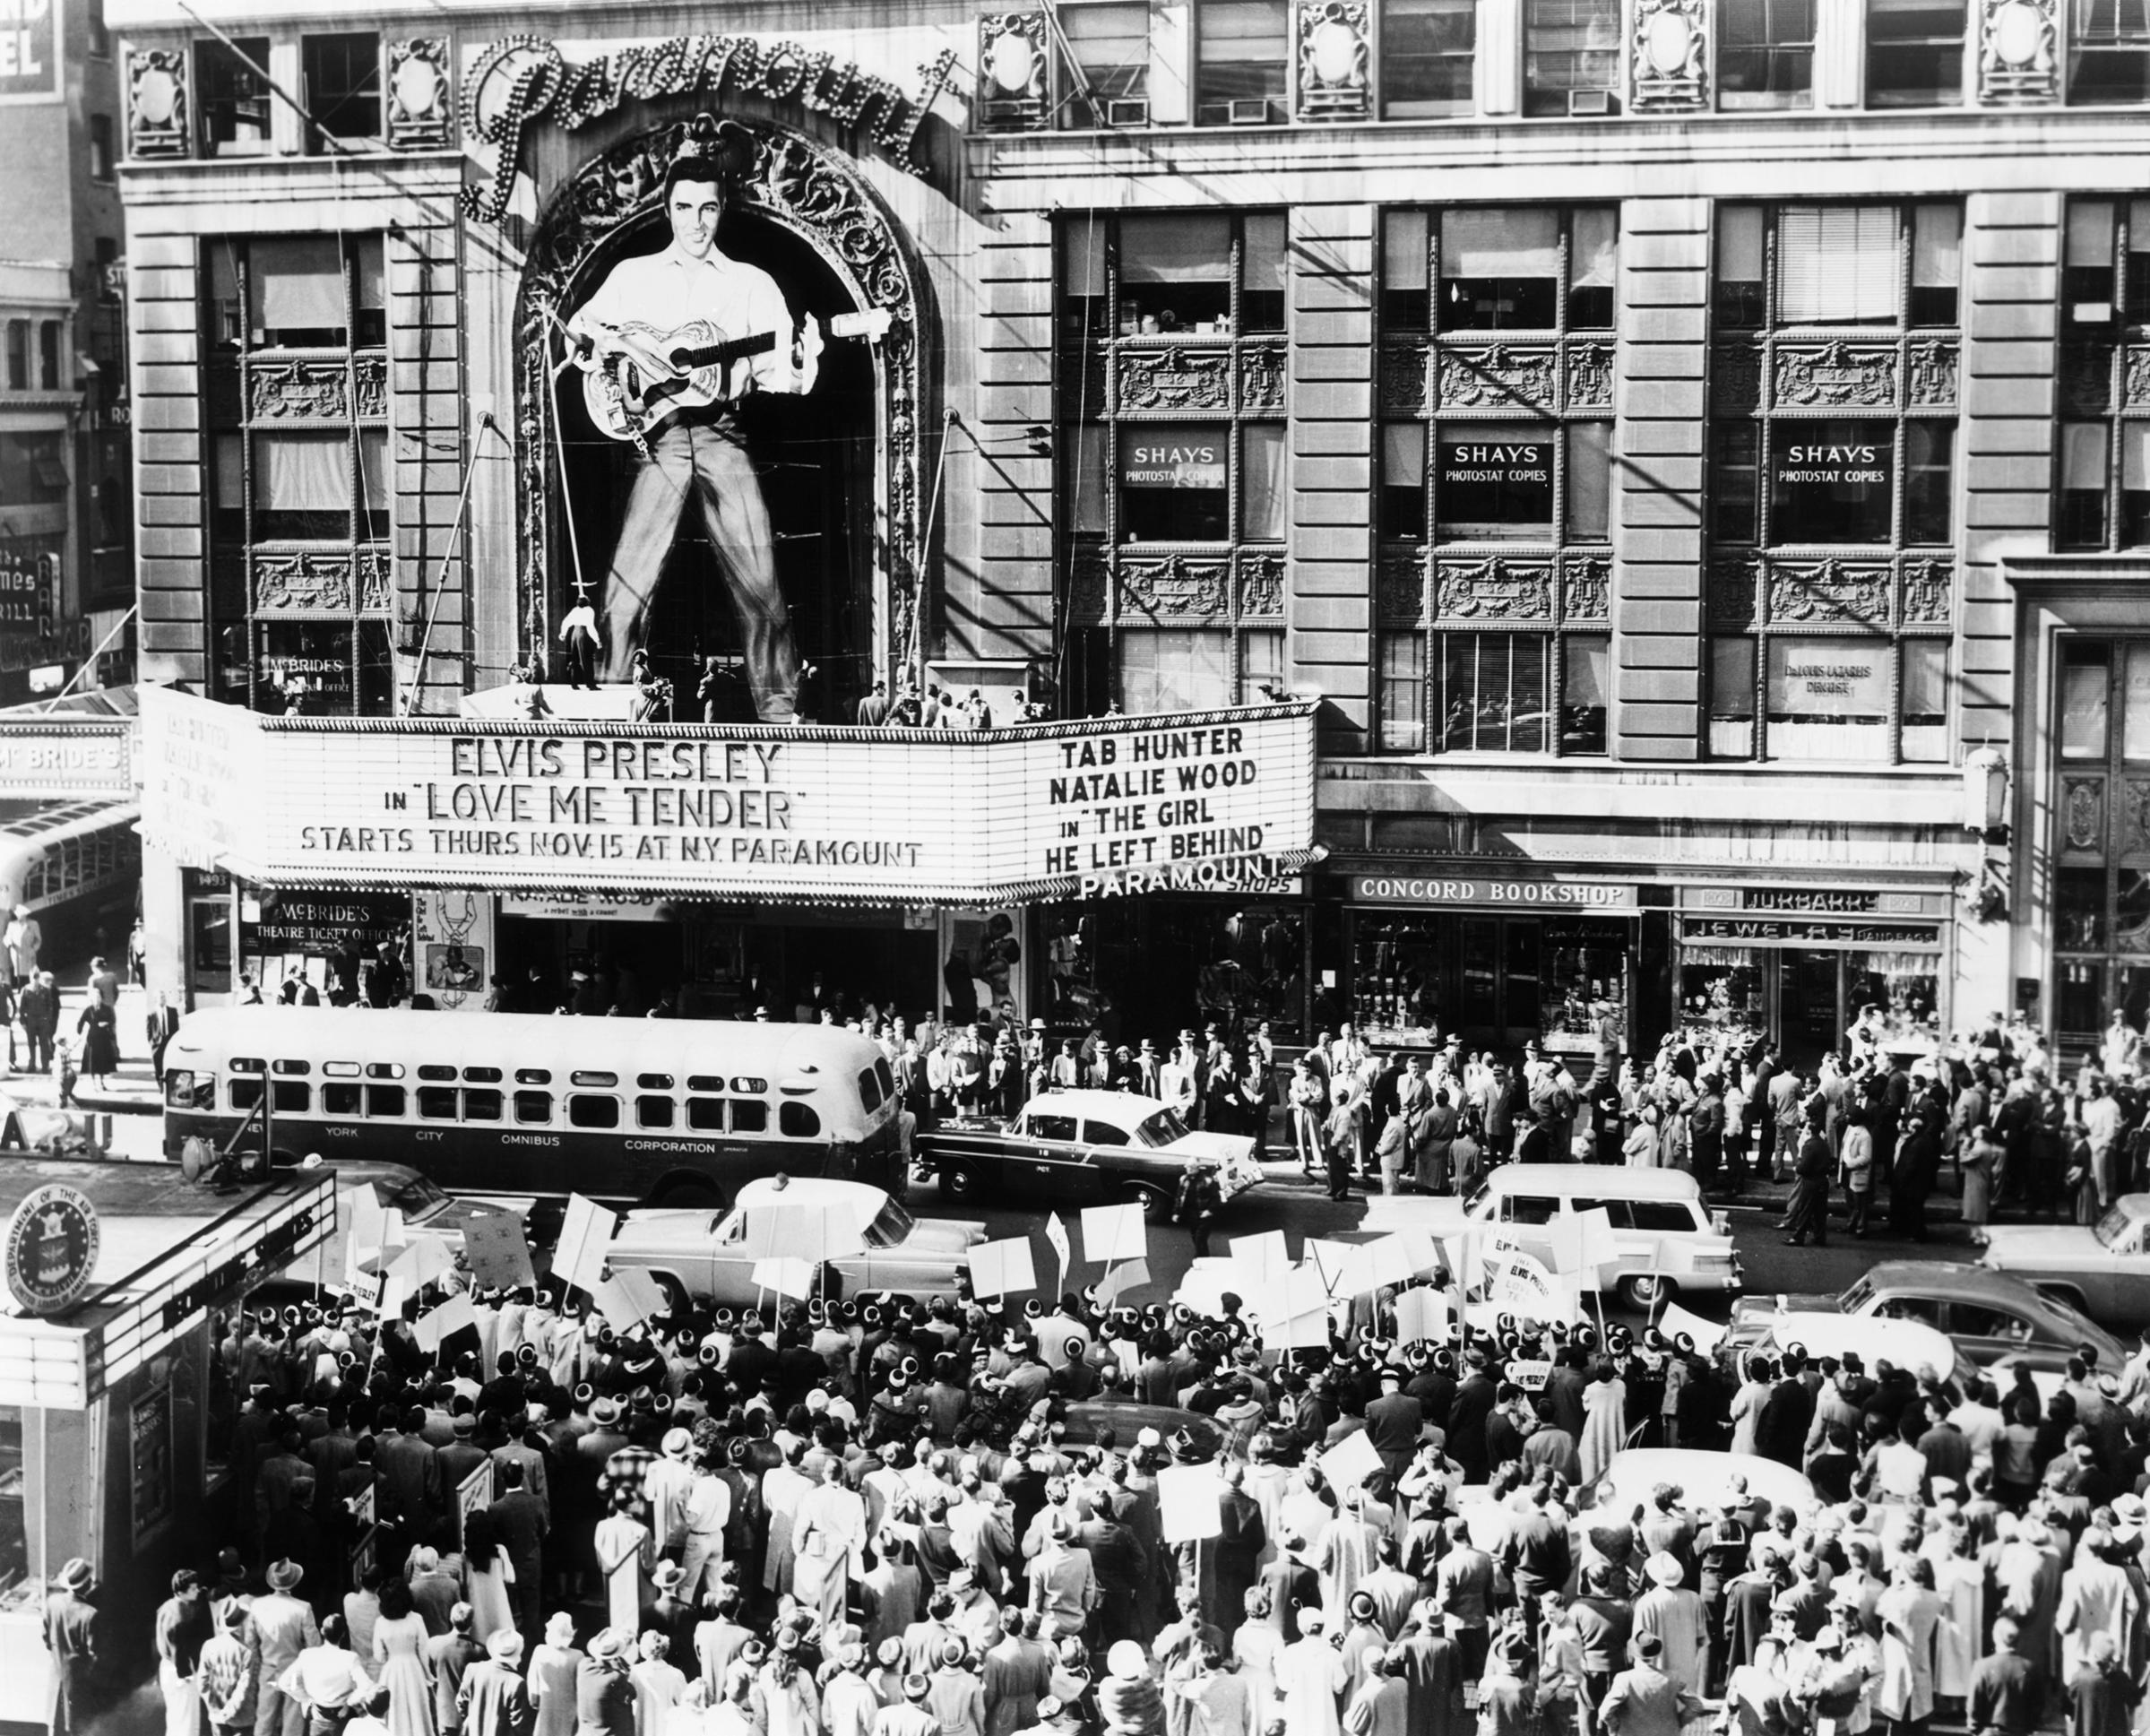 Opening of 'Love Me Tender' movie at the Paramount Theater, New York, on November 15, 1956.